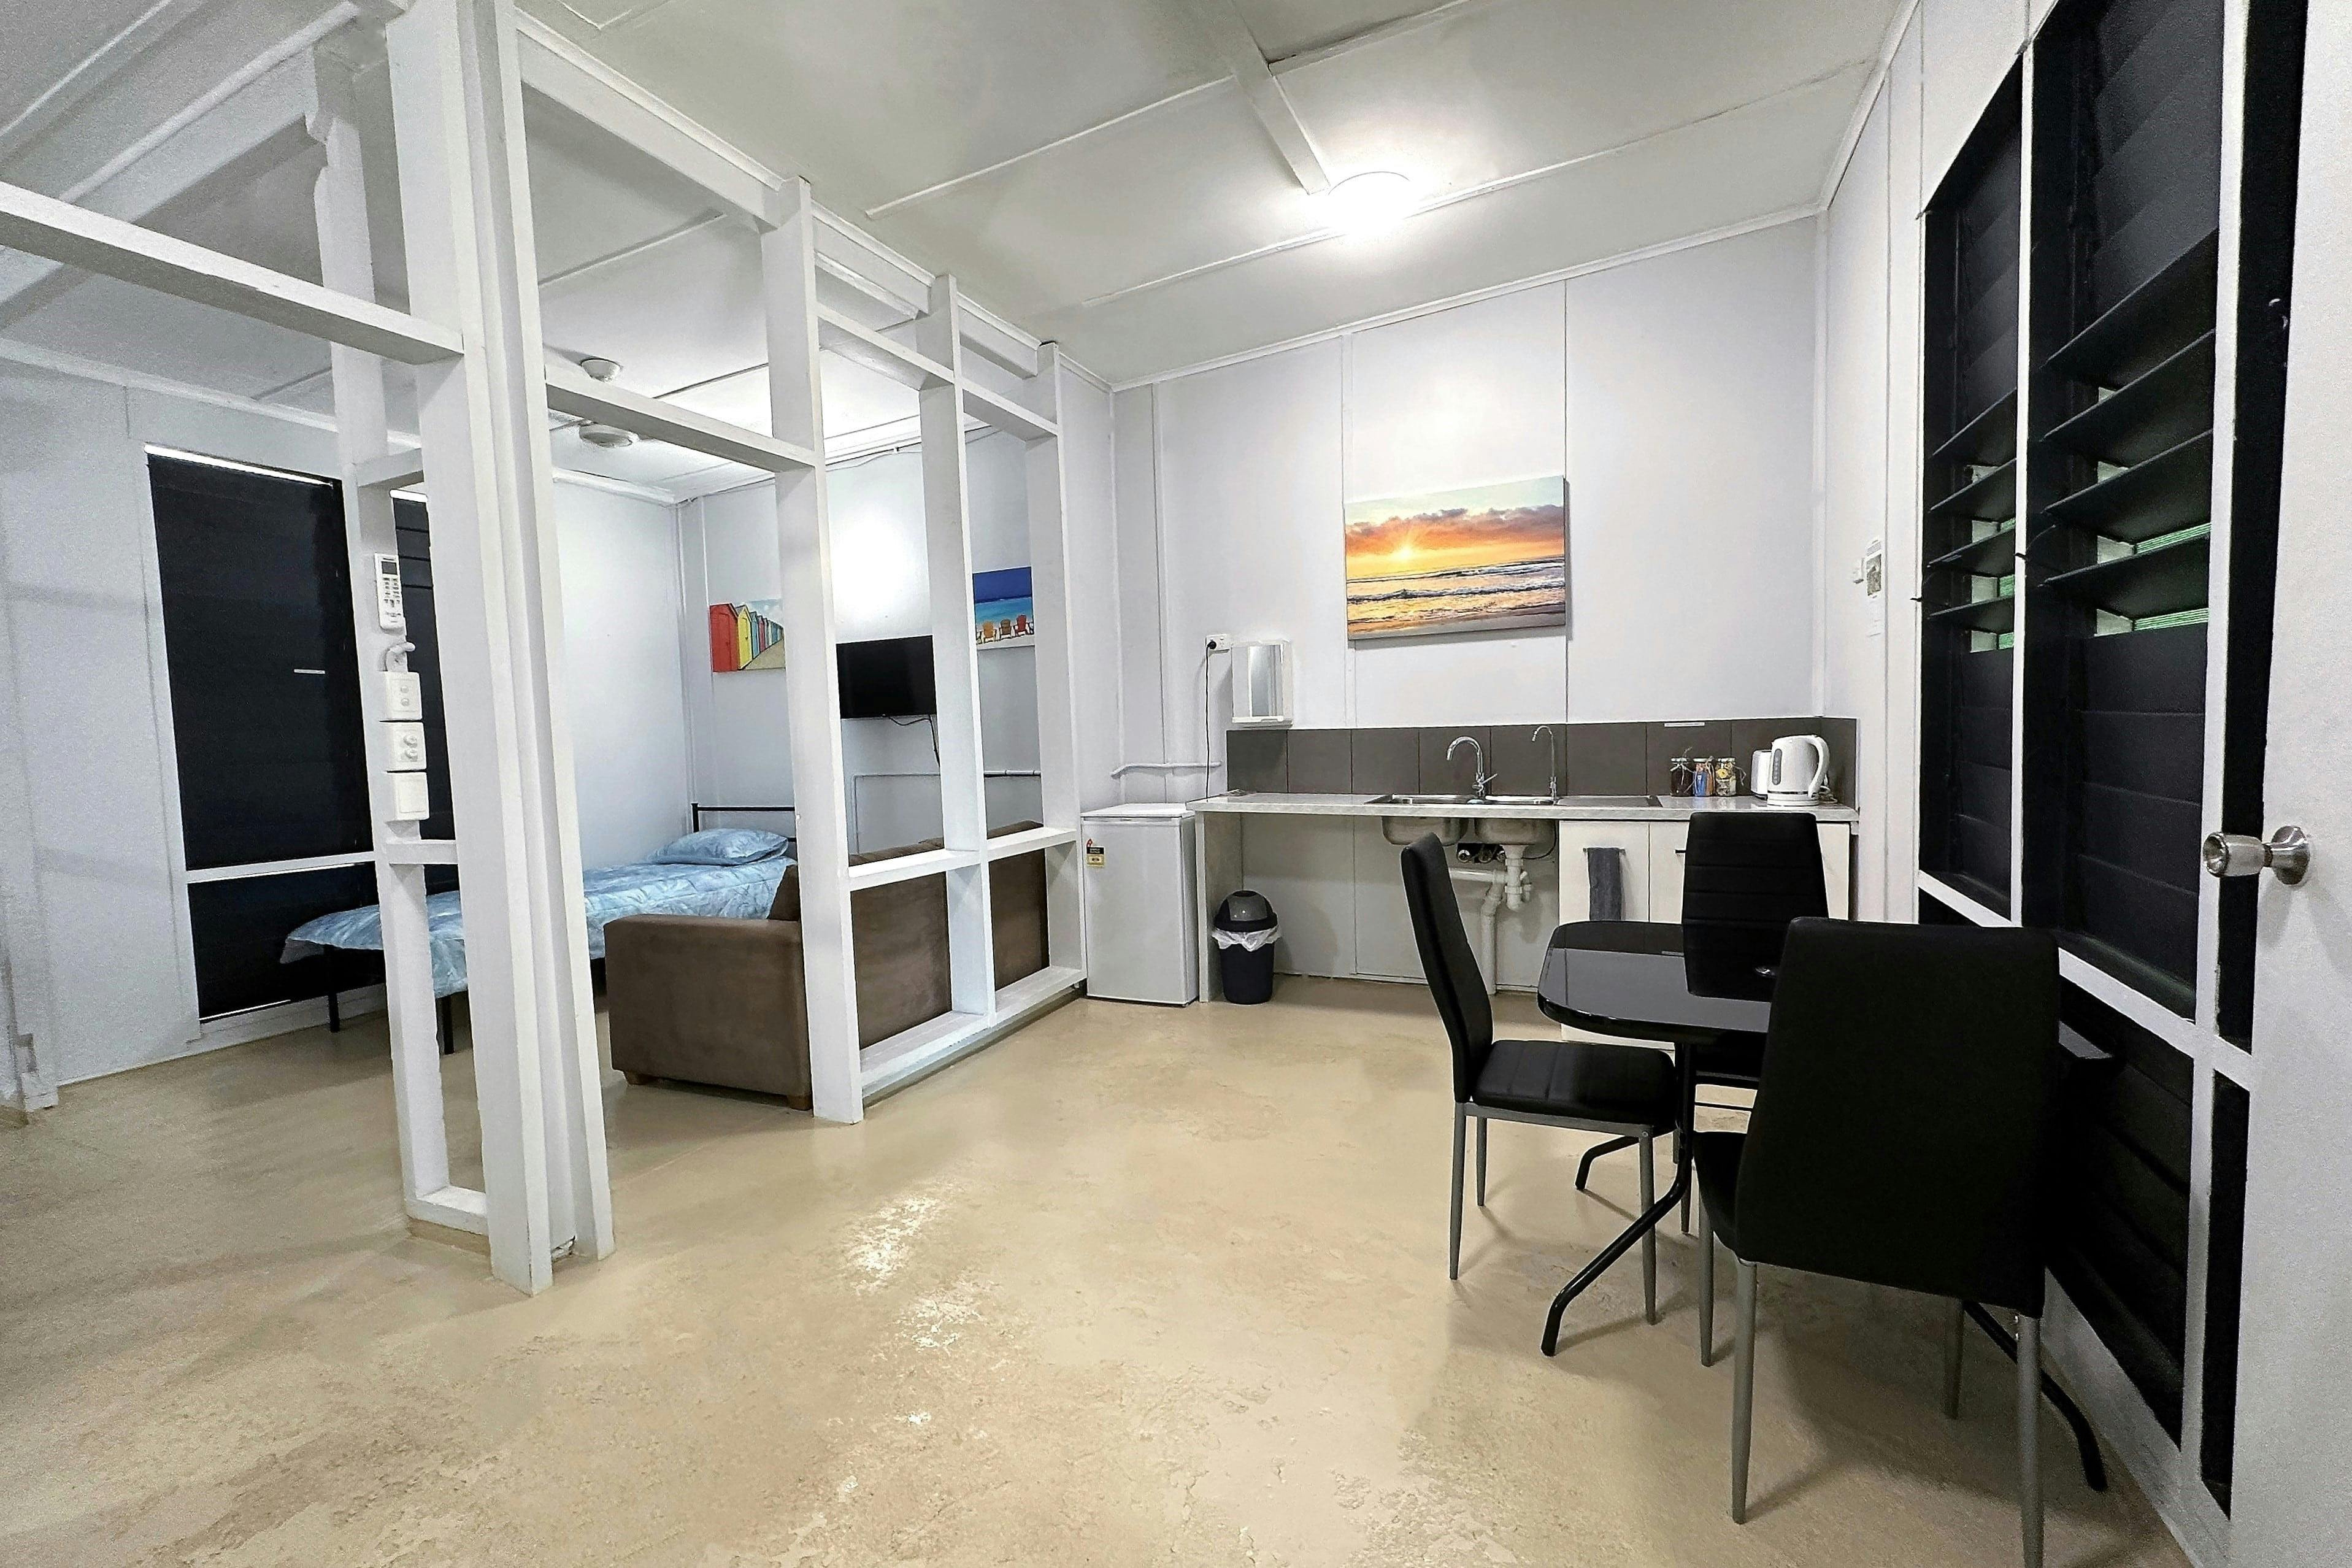 Self-Contained Unit at Golden Sands Retreat, Wagait Beach, NT, Dining Room and Kitchenette